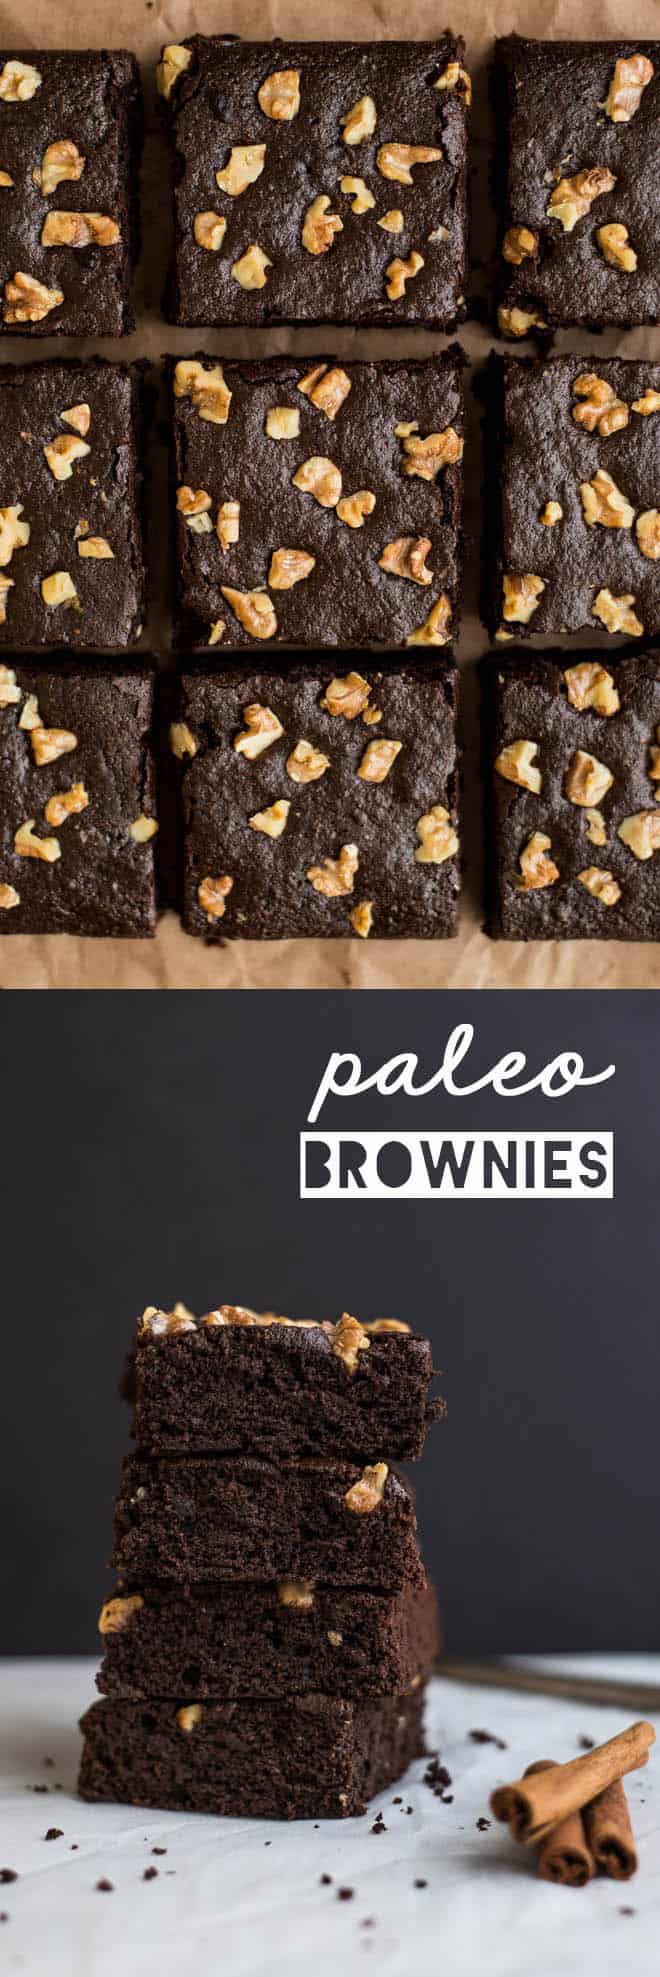 Spiced Paleo Brownies - super easy dessert that's naturally sweetened and gluten free! by Lisa Lin of clube.futebolmilionario.com